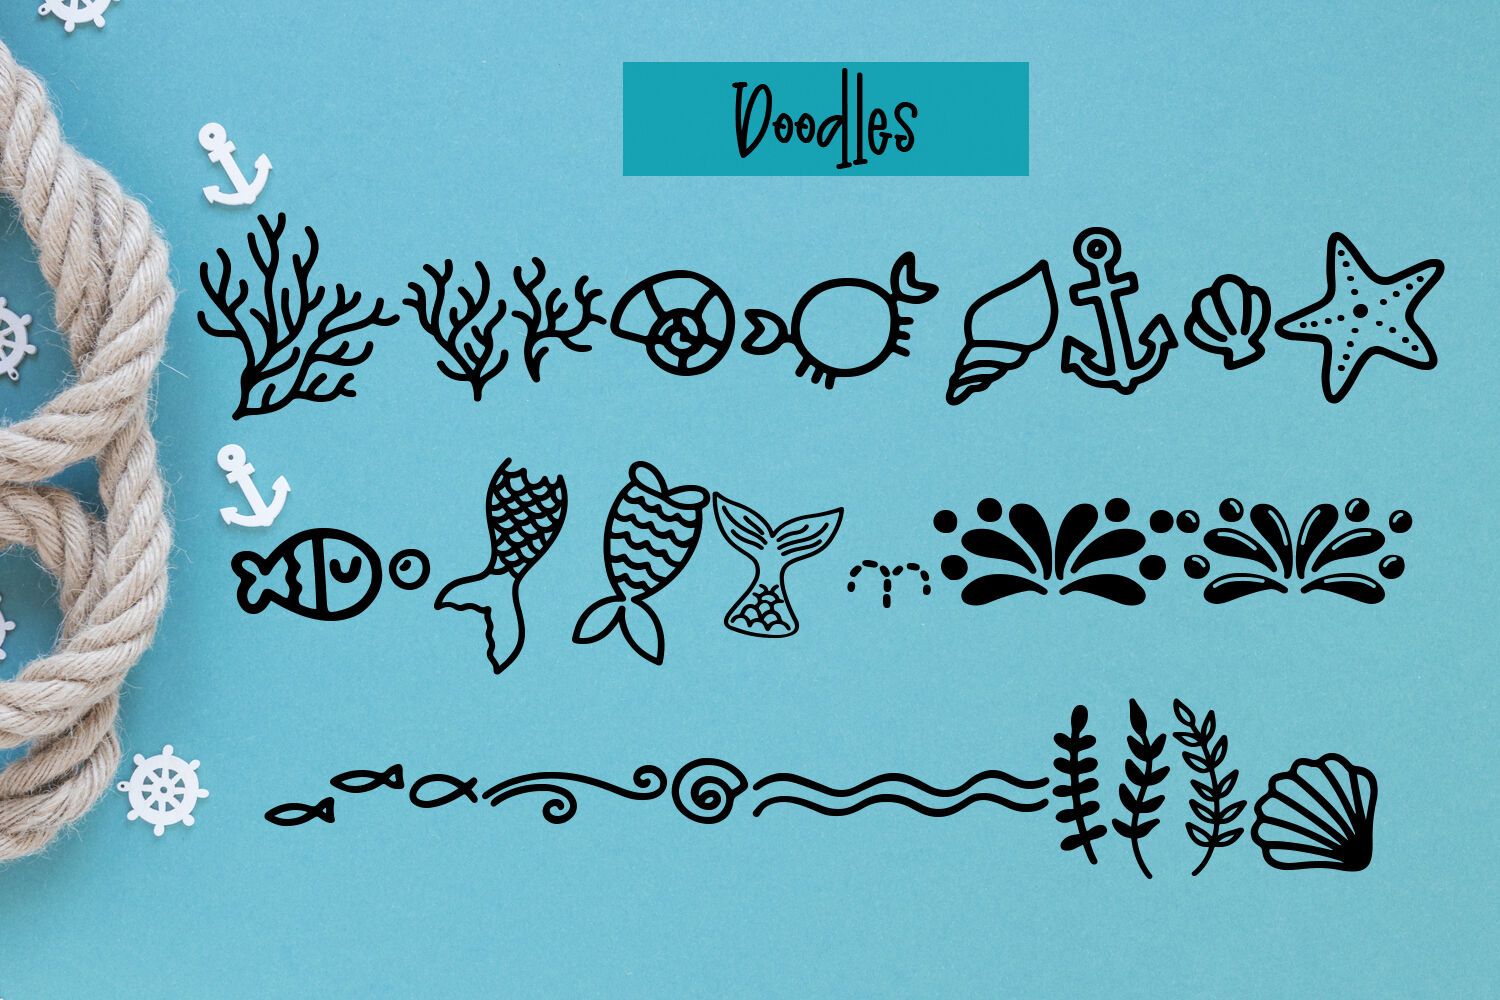 Madison S Tail A Mermaid Font Plus Nautical Doodles By Freeling Design House Thehungryjpeg Com